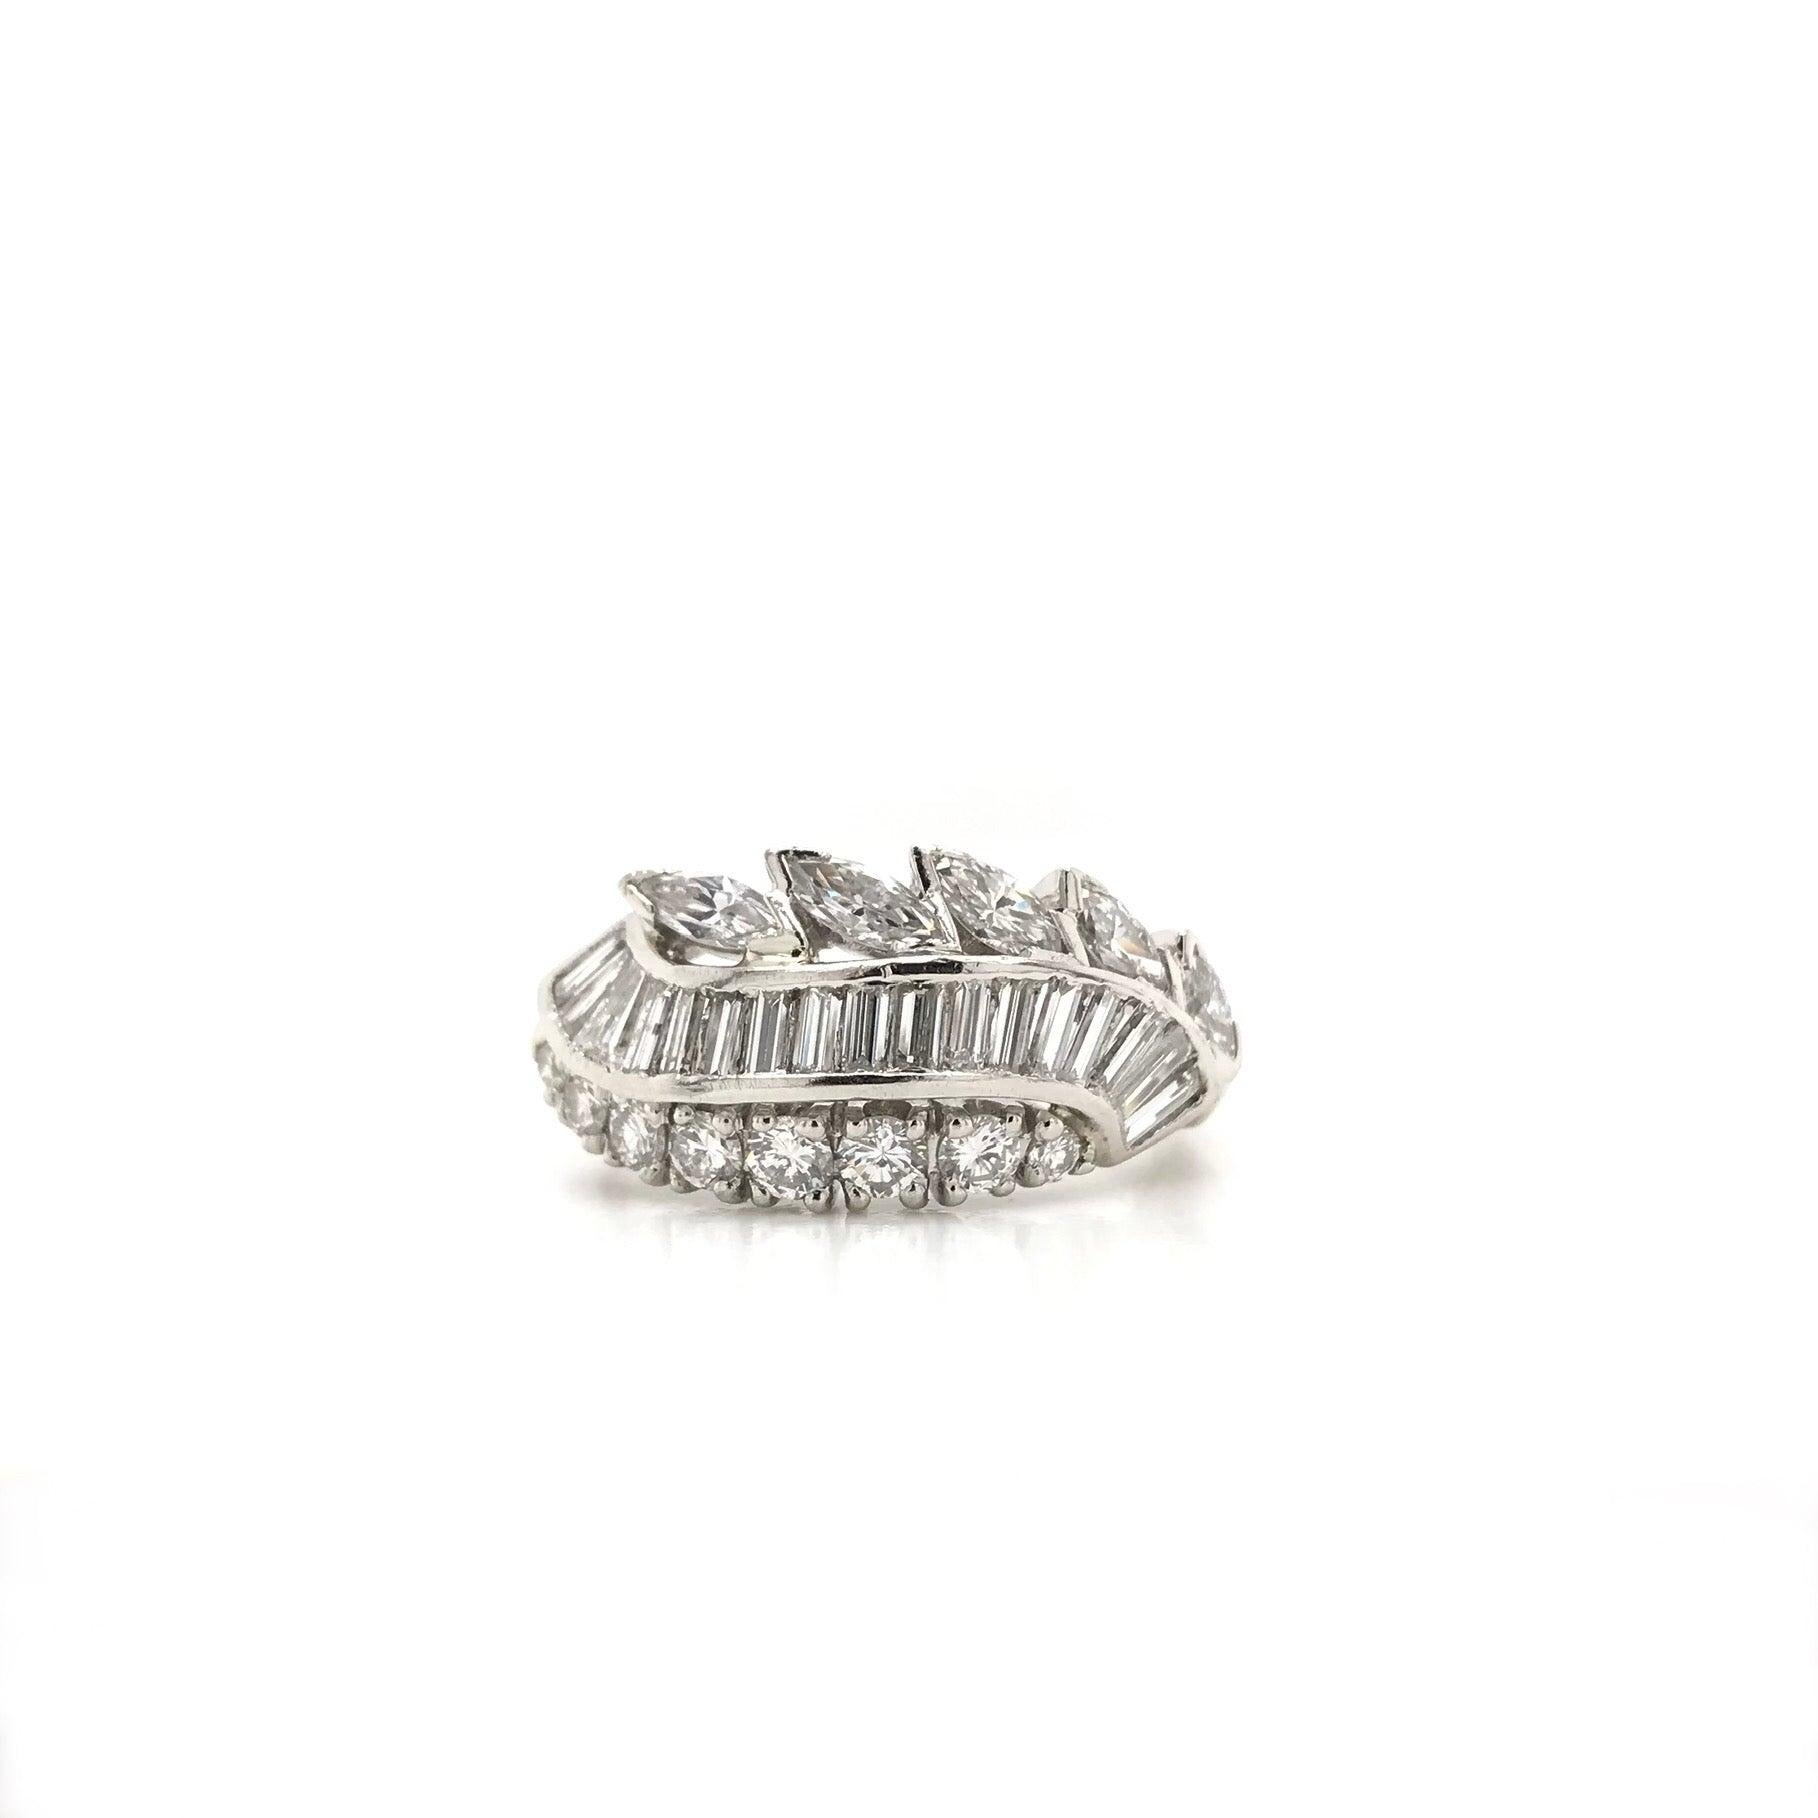 This vintage piece was crafted sometime during the Retro design period (1940-1960). This stunning vintage ring features 30 sparkling diamonds in three different cuts arranged for a very striking and alluring combination. The ring features 5 marquise